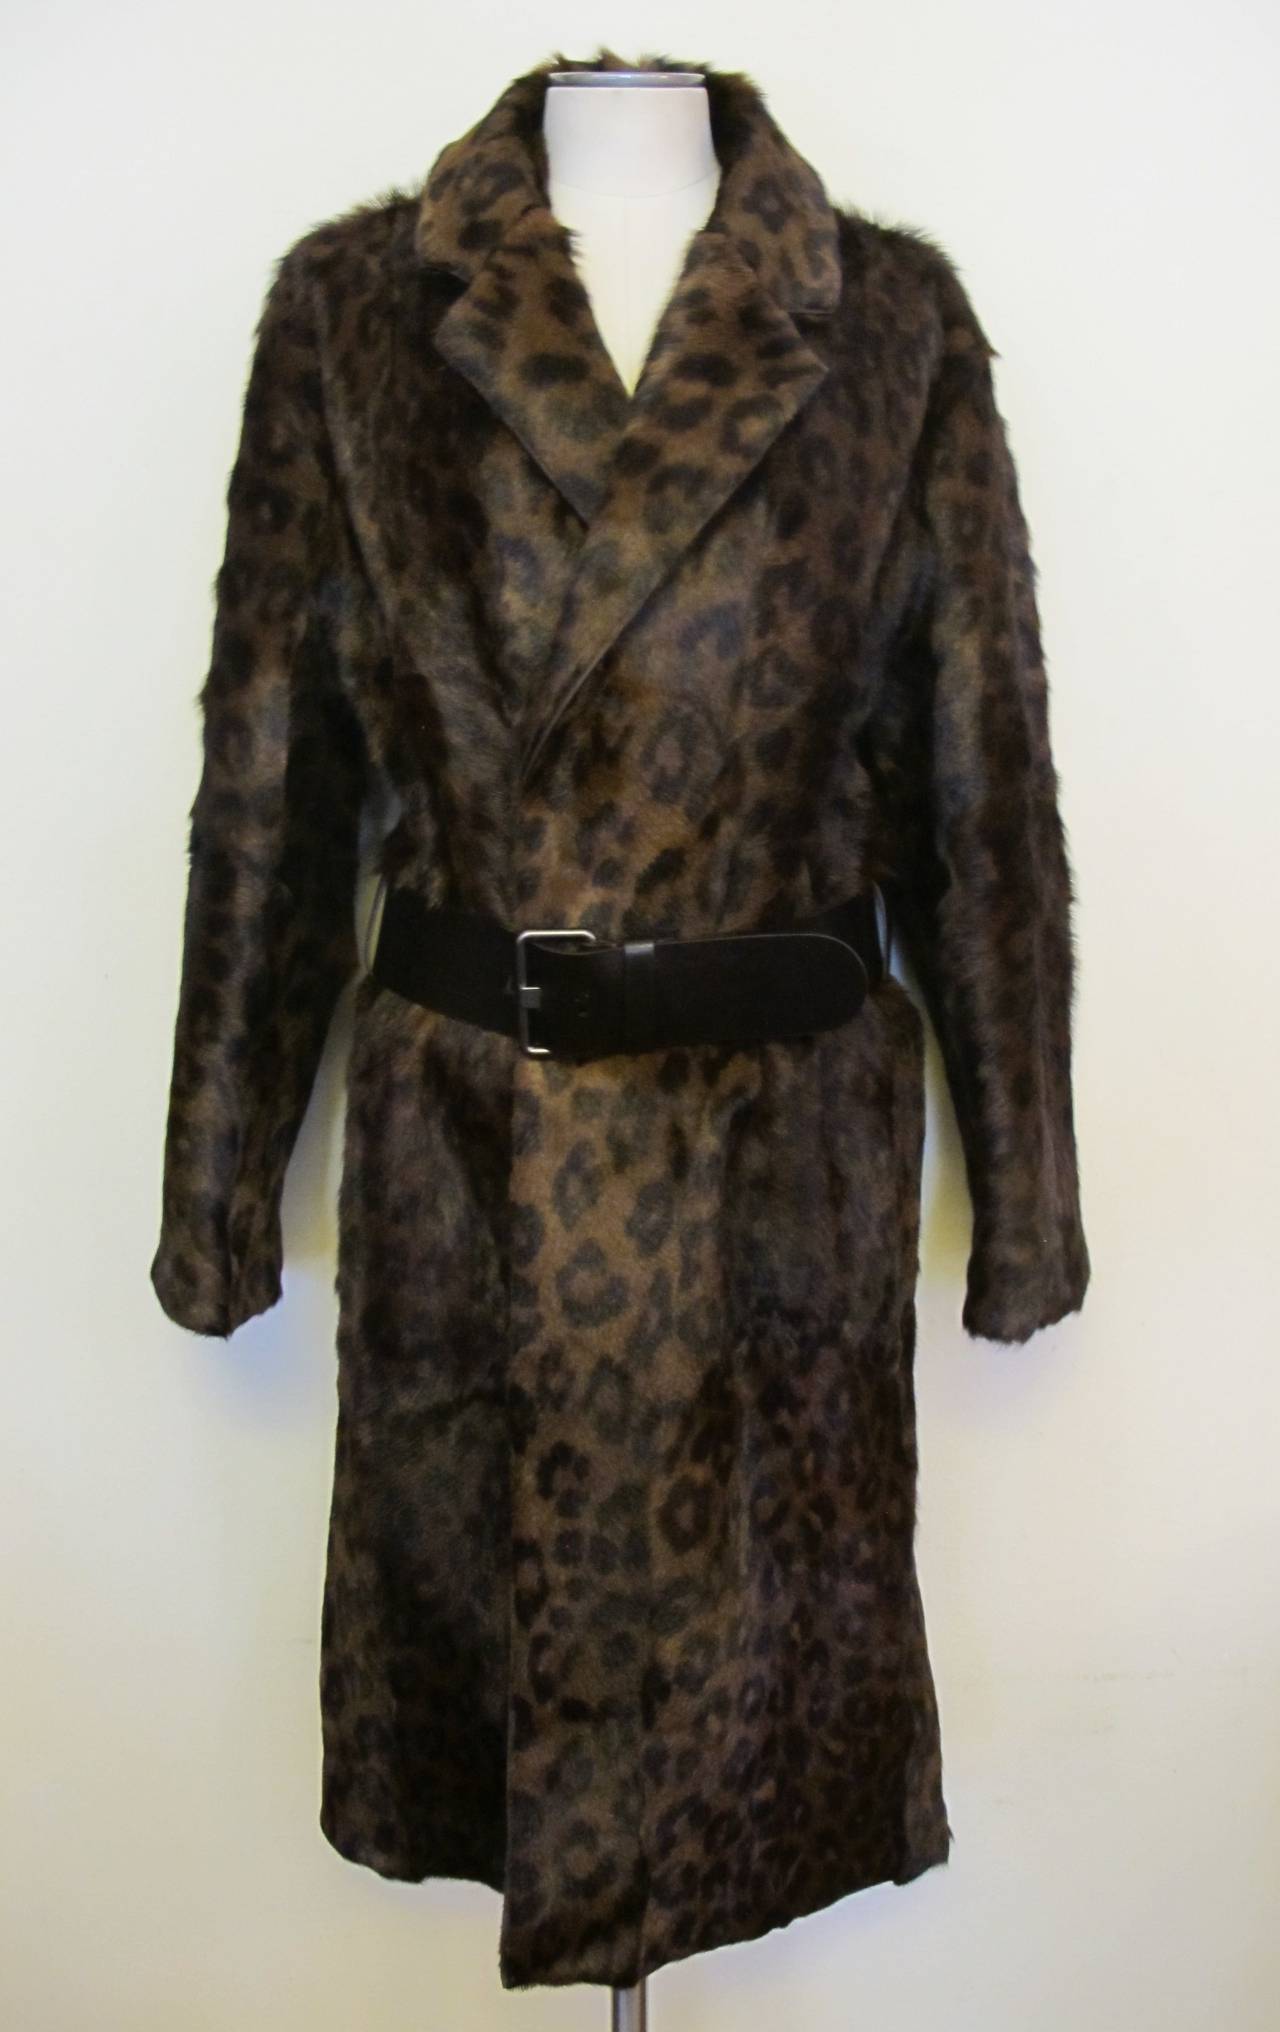 Over the Top Tom Ford chic leopard Winter Coat is oversize and cinches around the waist with a leather belt which is 39.75 inches in length and fits waist size 32, 33 or 34. The width of the belt is 2.25 inches. Original Price: $13,150.00. 
Helpers